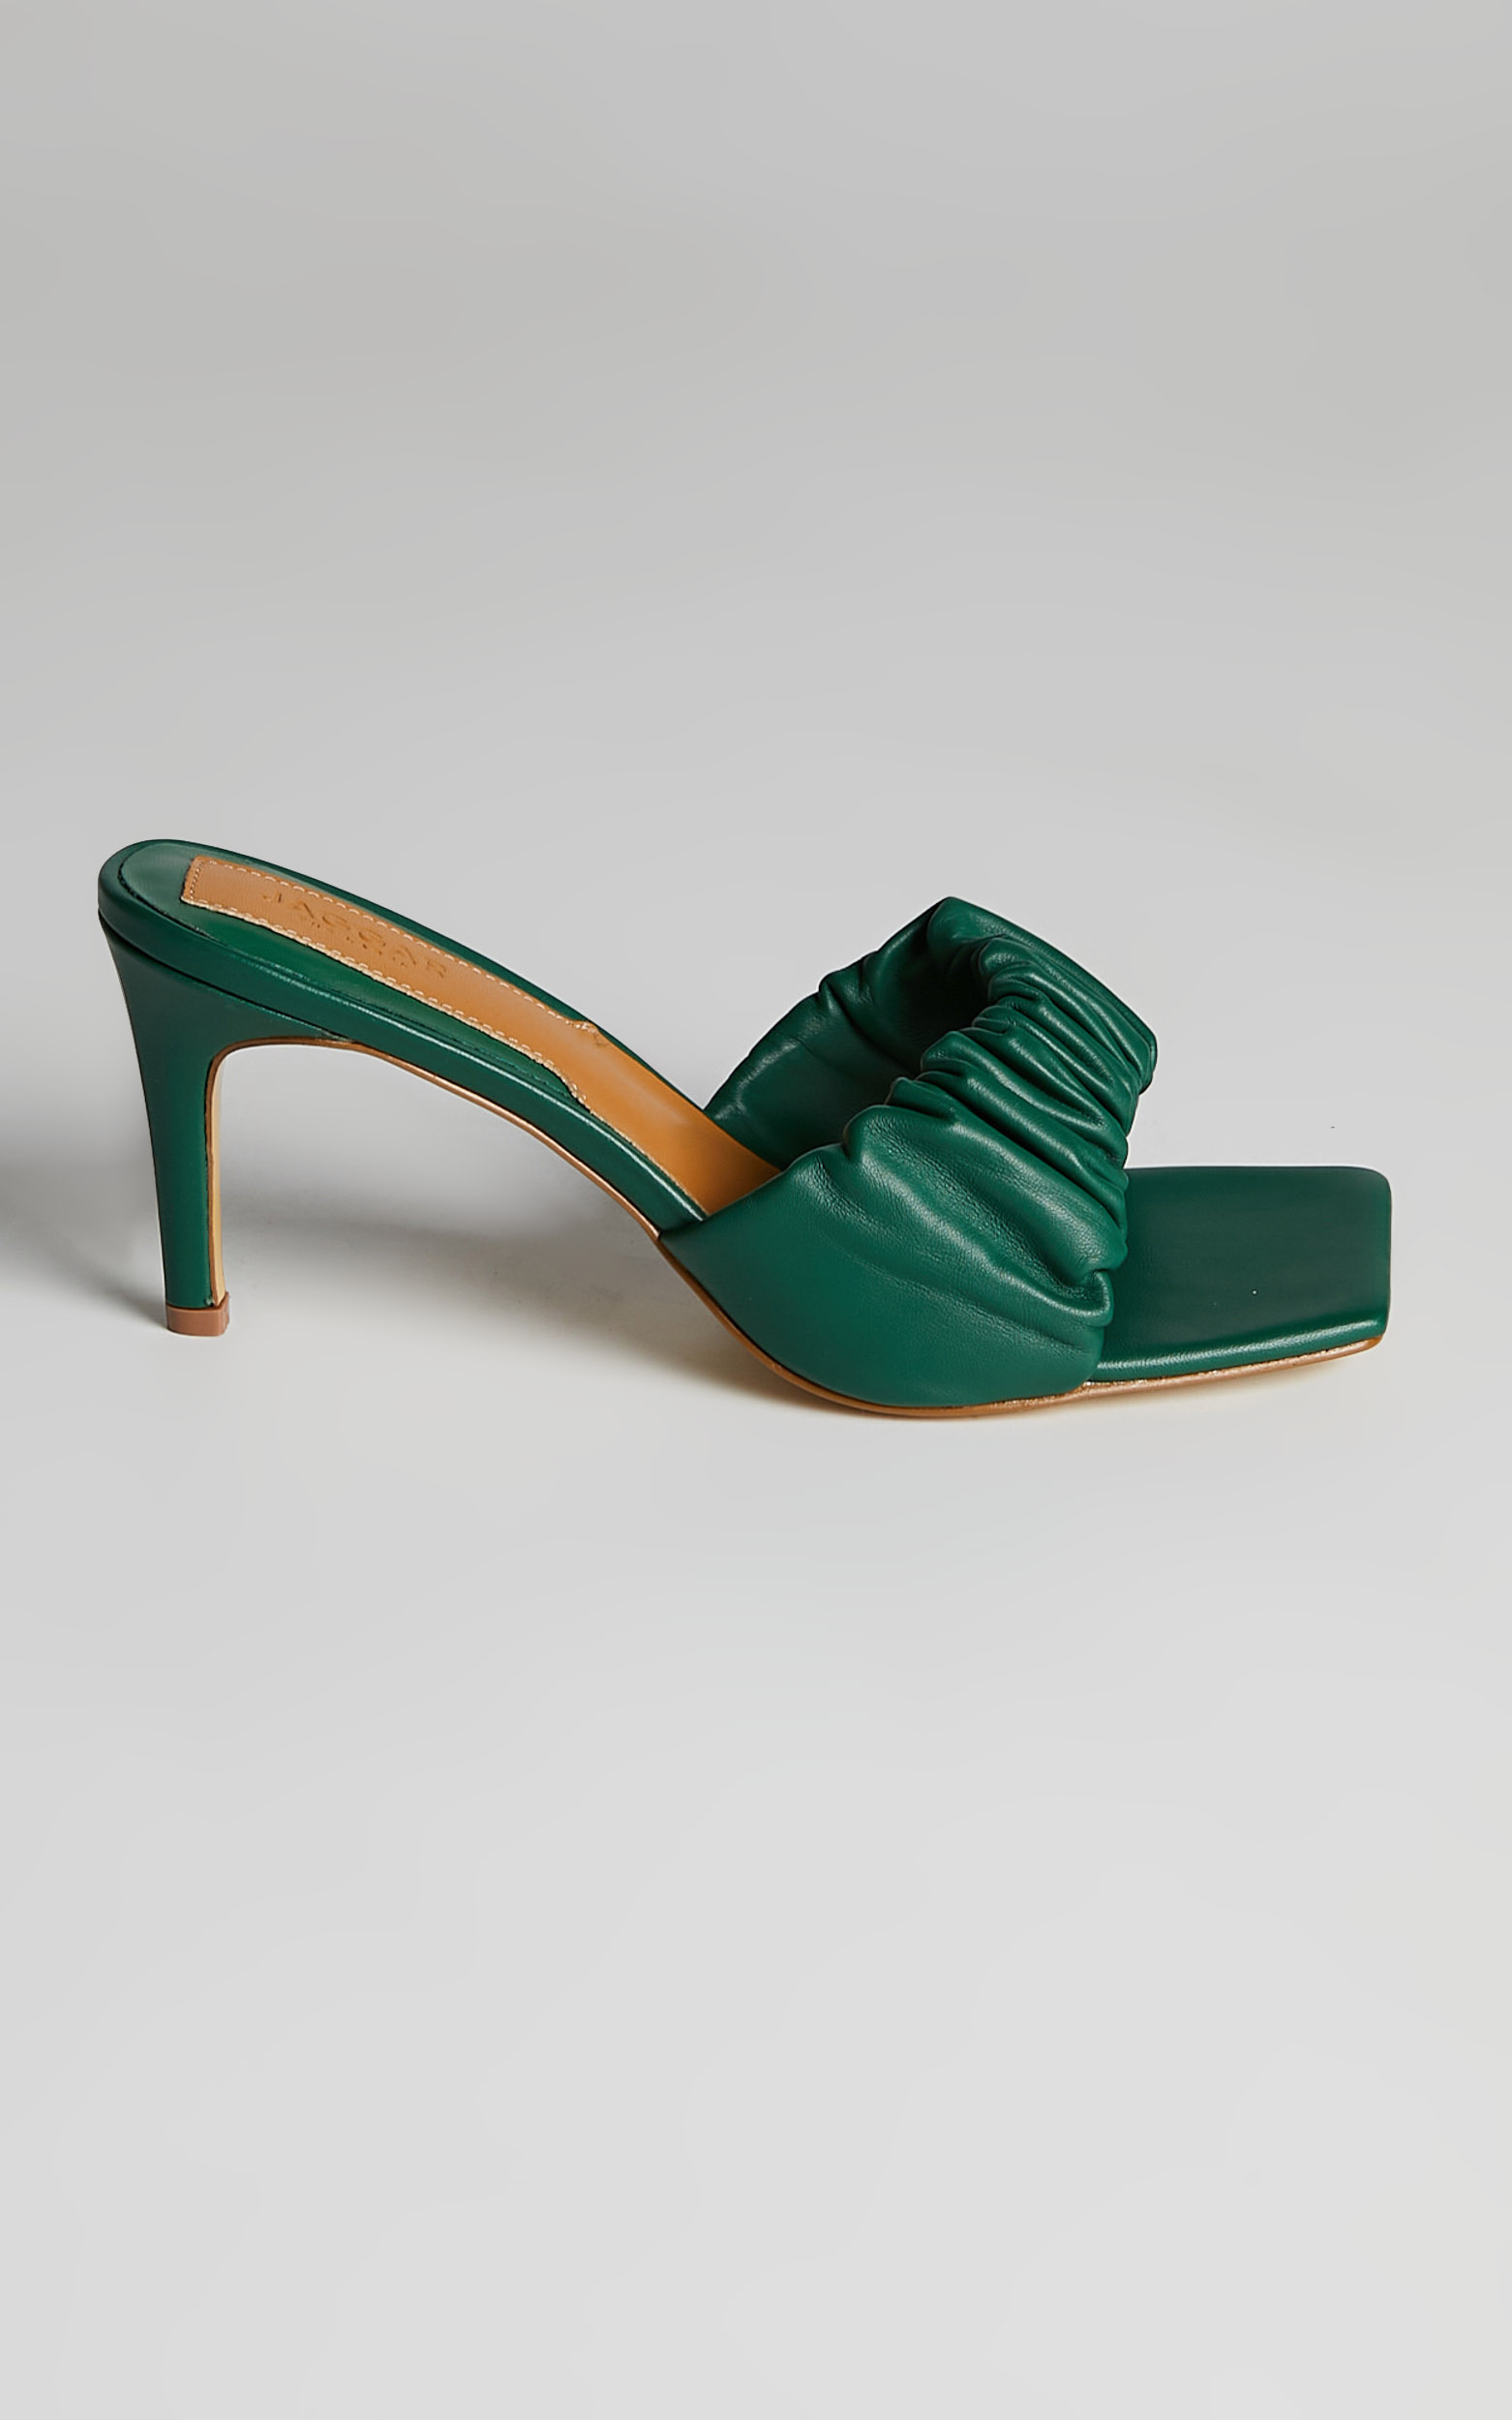 Jaggar The Label - Scrunched Heel in Foliage Green - 05, GRN1, hi-res image number null